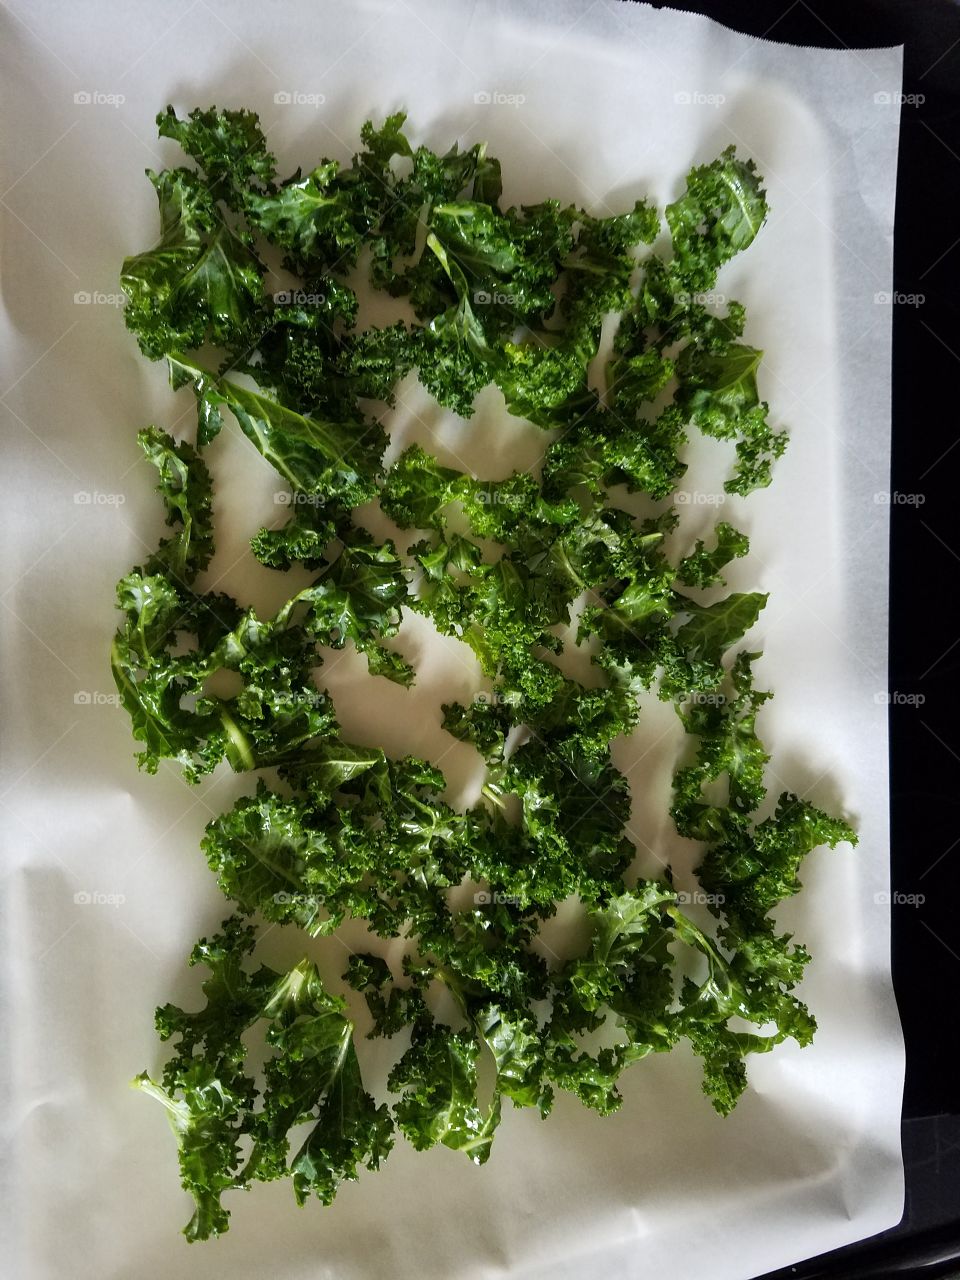 fresh out of the oven baked kale crispy chips.